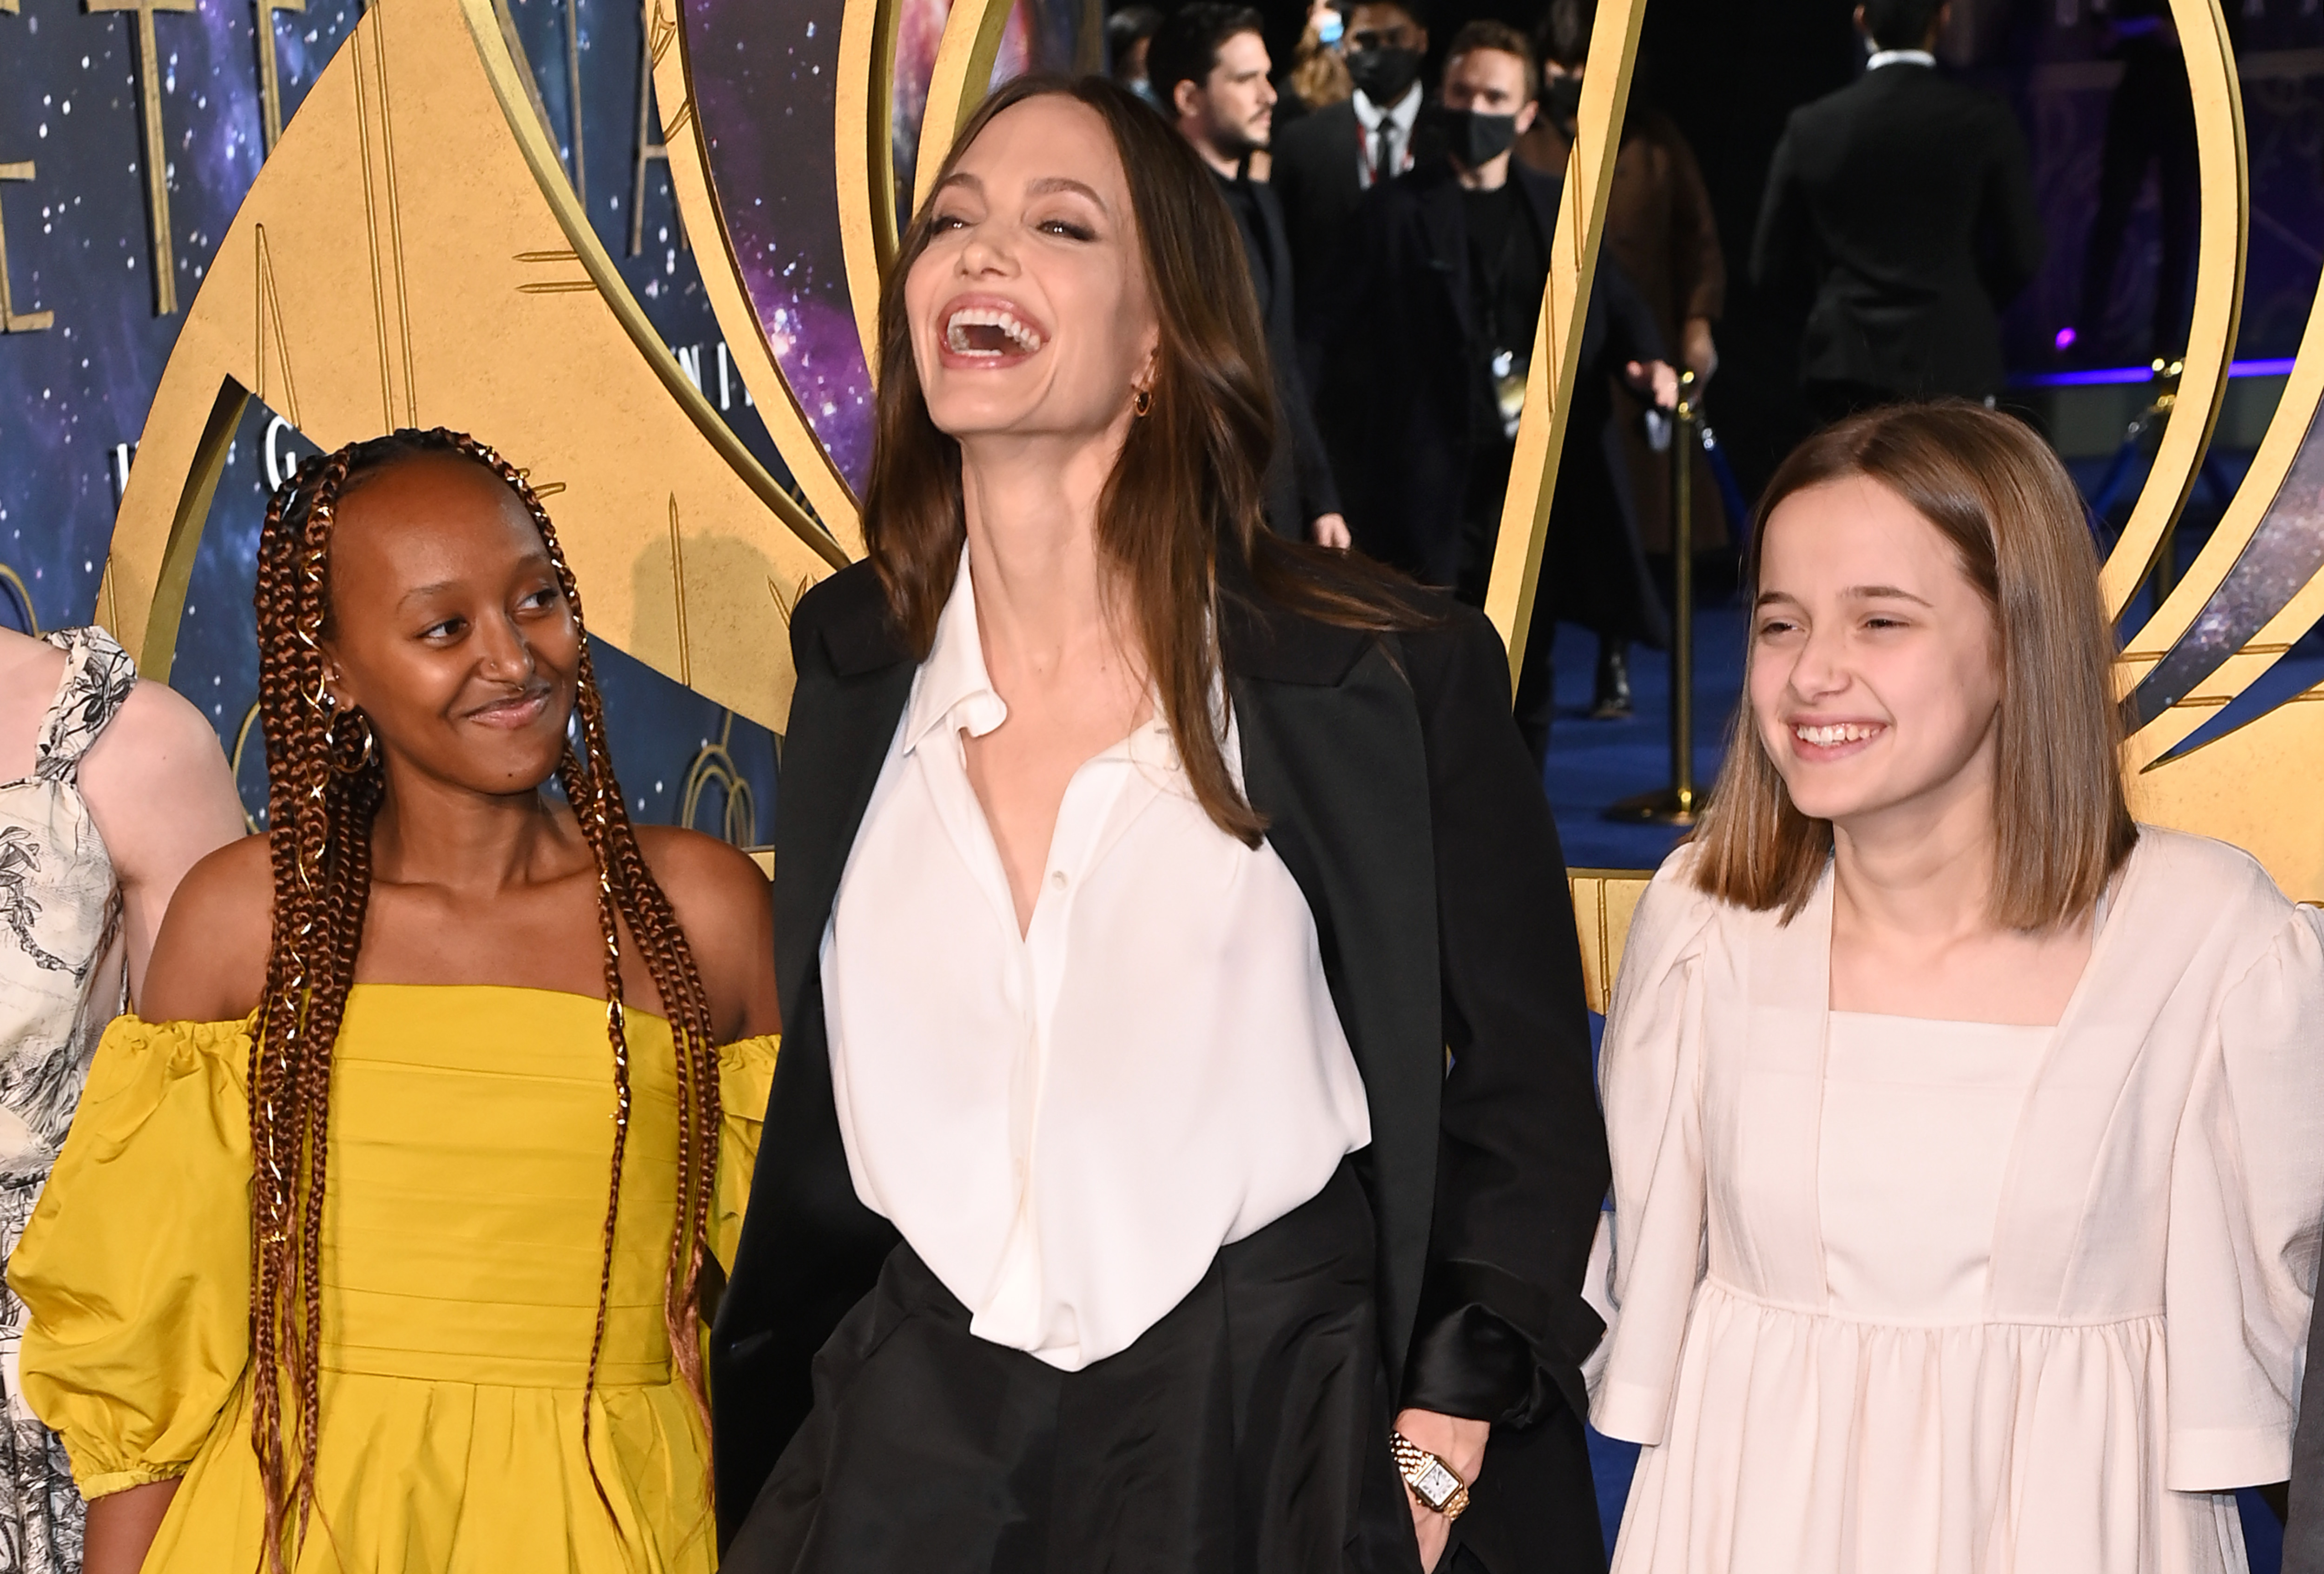 Zahara Jolie-Pitt, Angelina Jolie and Vivienne Jolie-Pitt attend the gala screening of "The Eternals" at the BFI IMAX Waterloo on October 27, 2021, in London, England. | Source: Getty Images